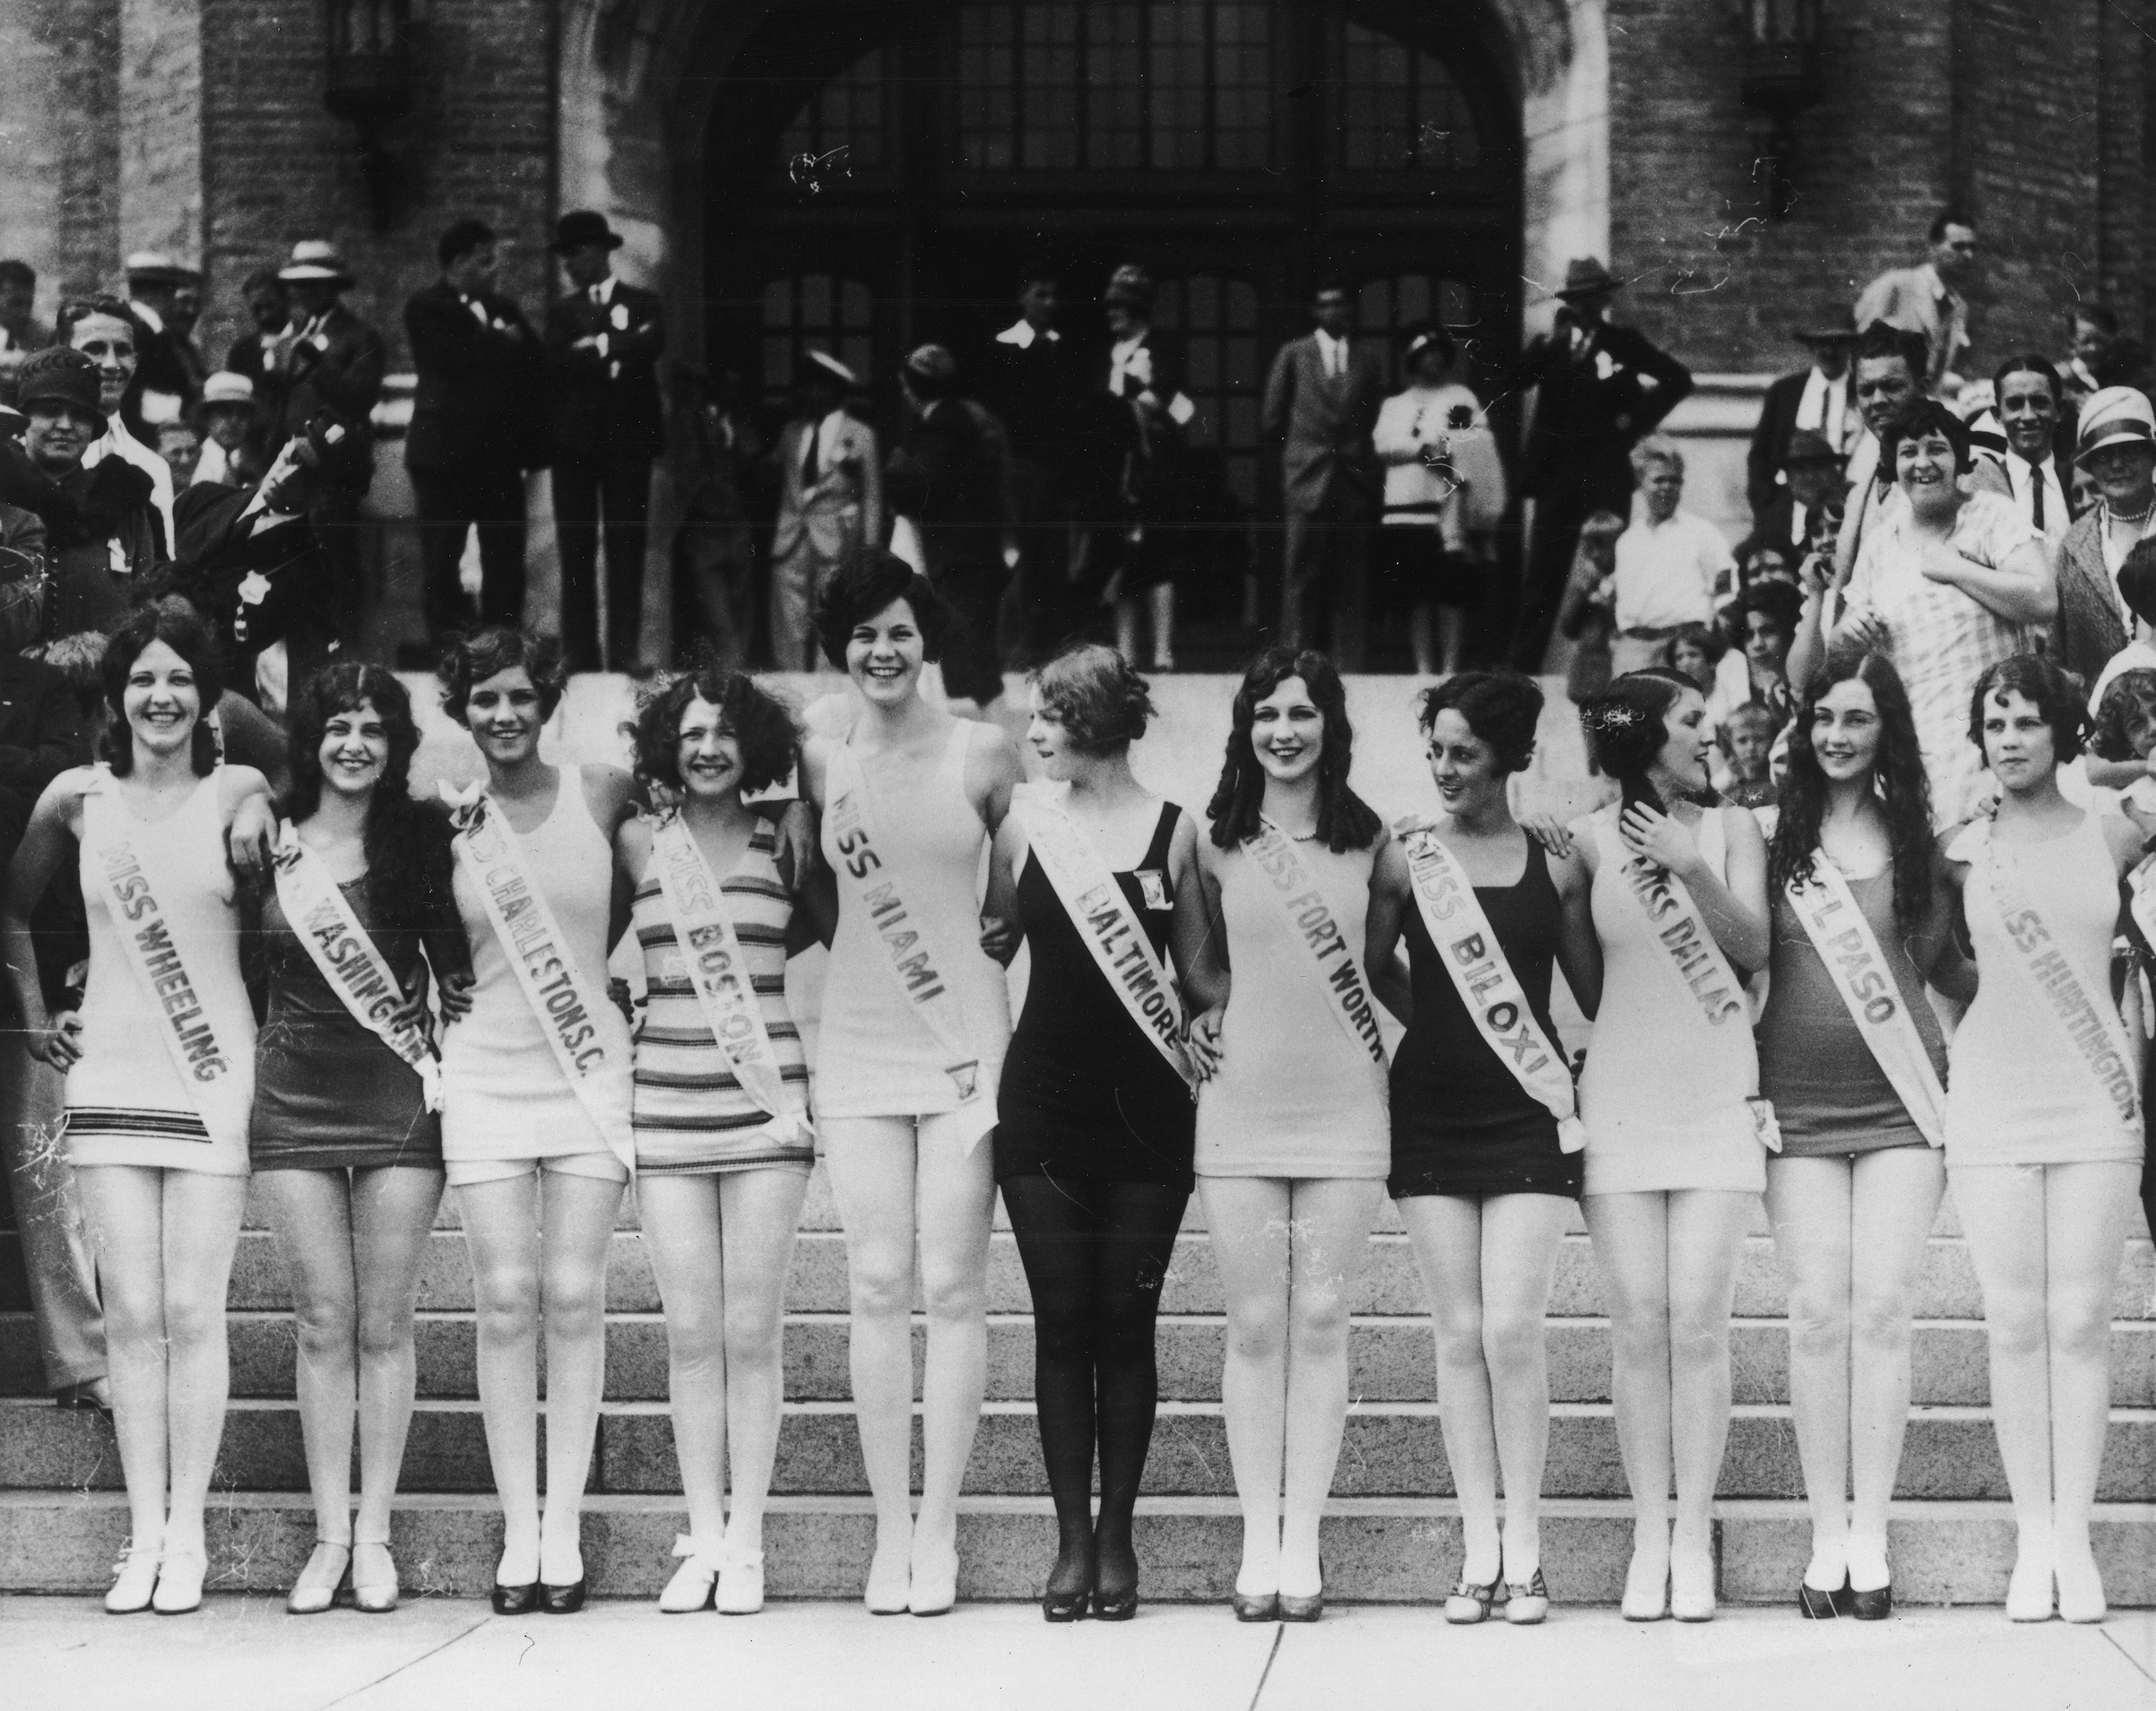 1927: Contestants in the 'Miss America' pageant pose in a line, with their arms around each other, Atlantic City, N.J. (American Stock Archive/Getty Images)